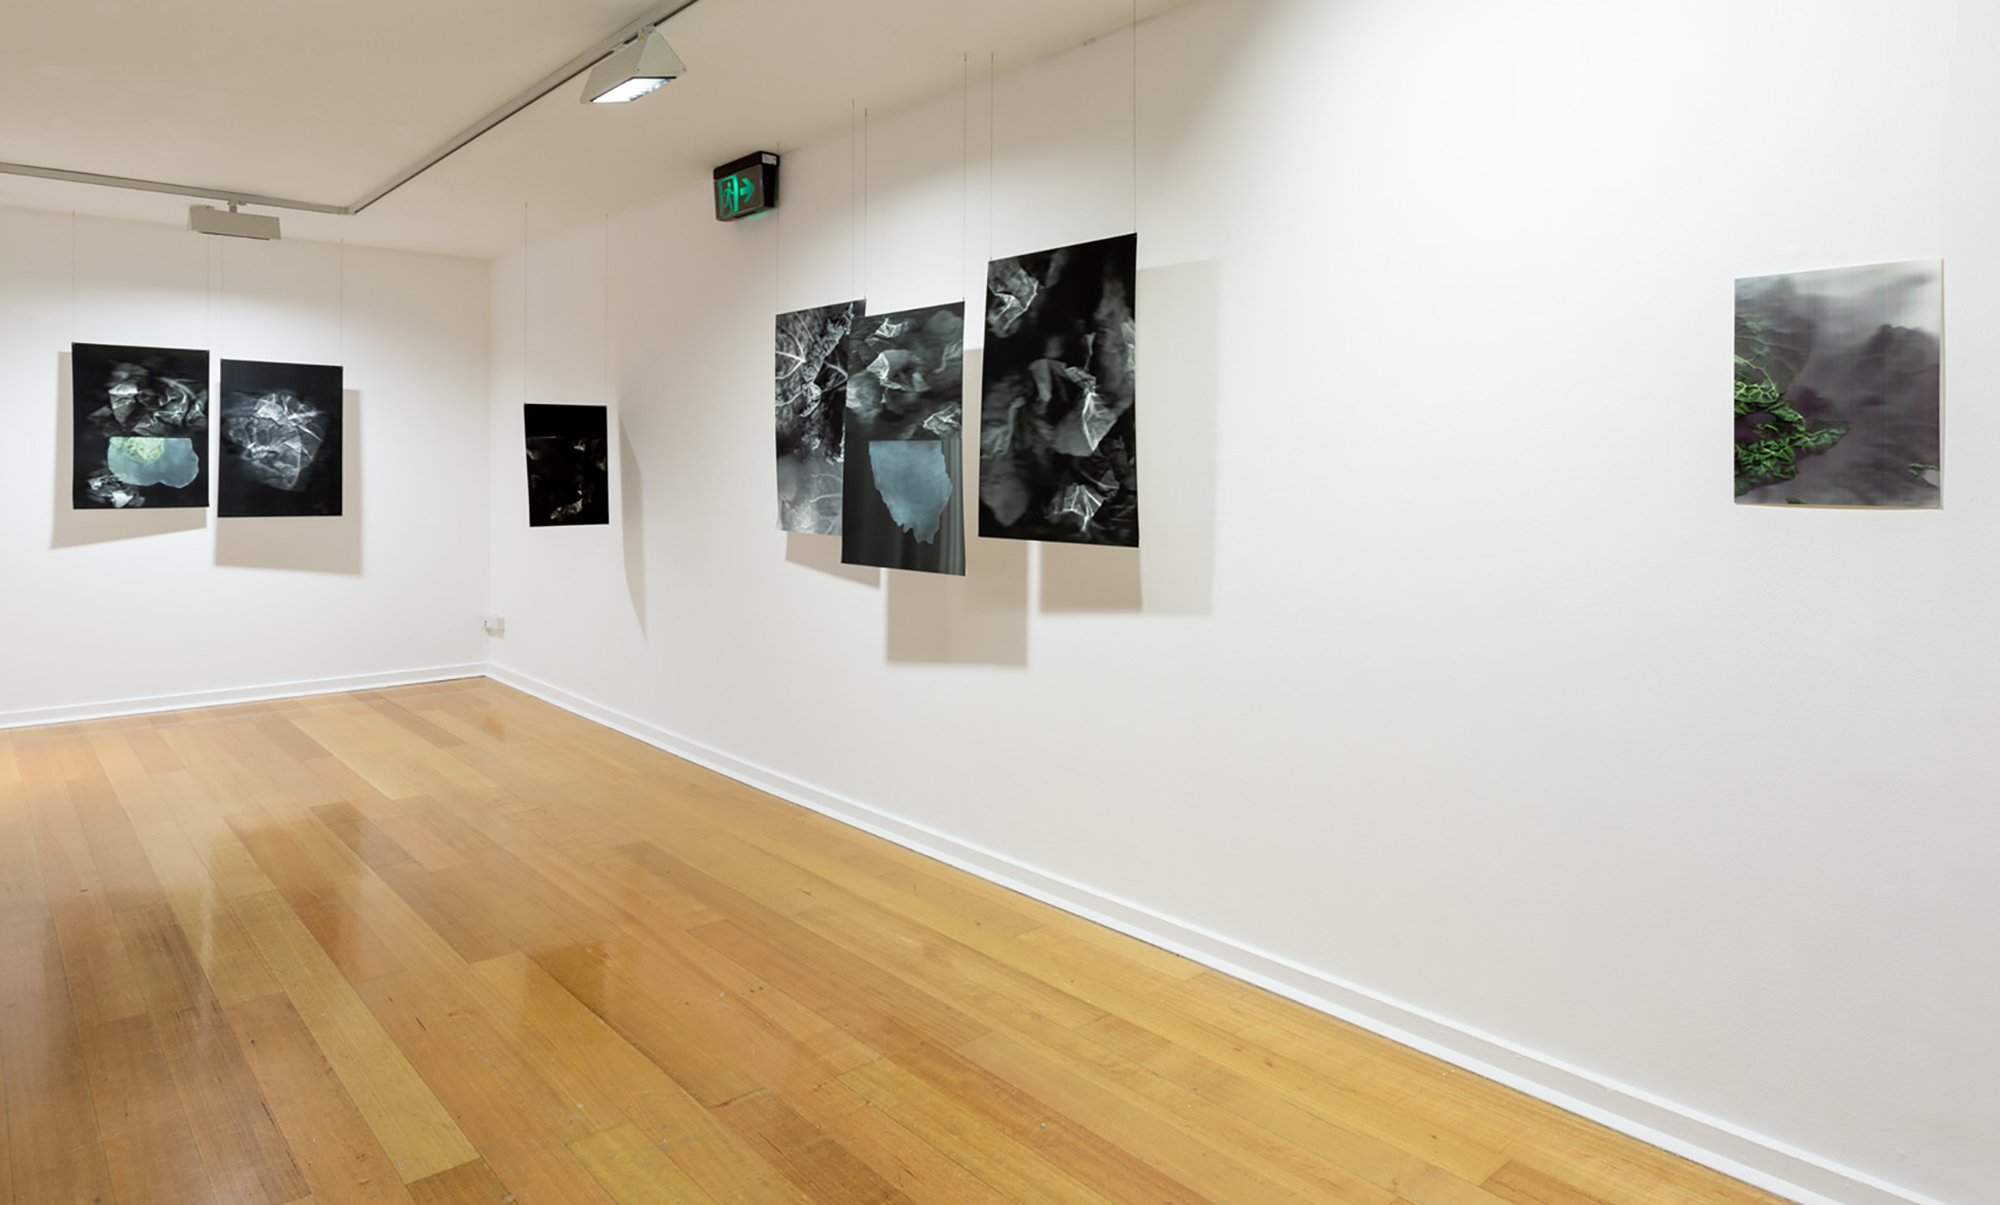 Archive in Play (installation view)